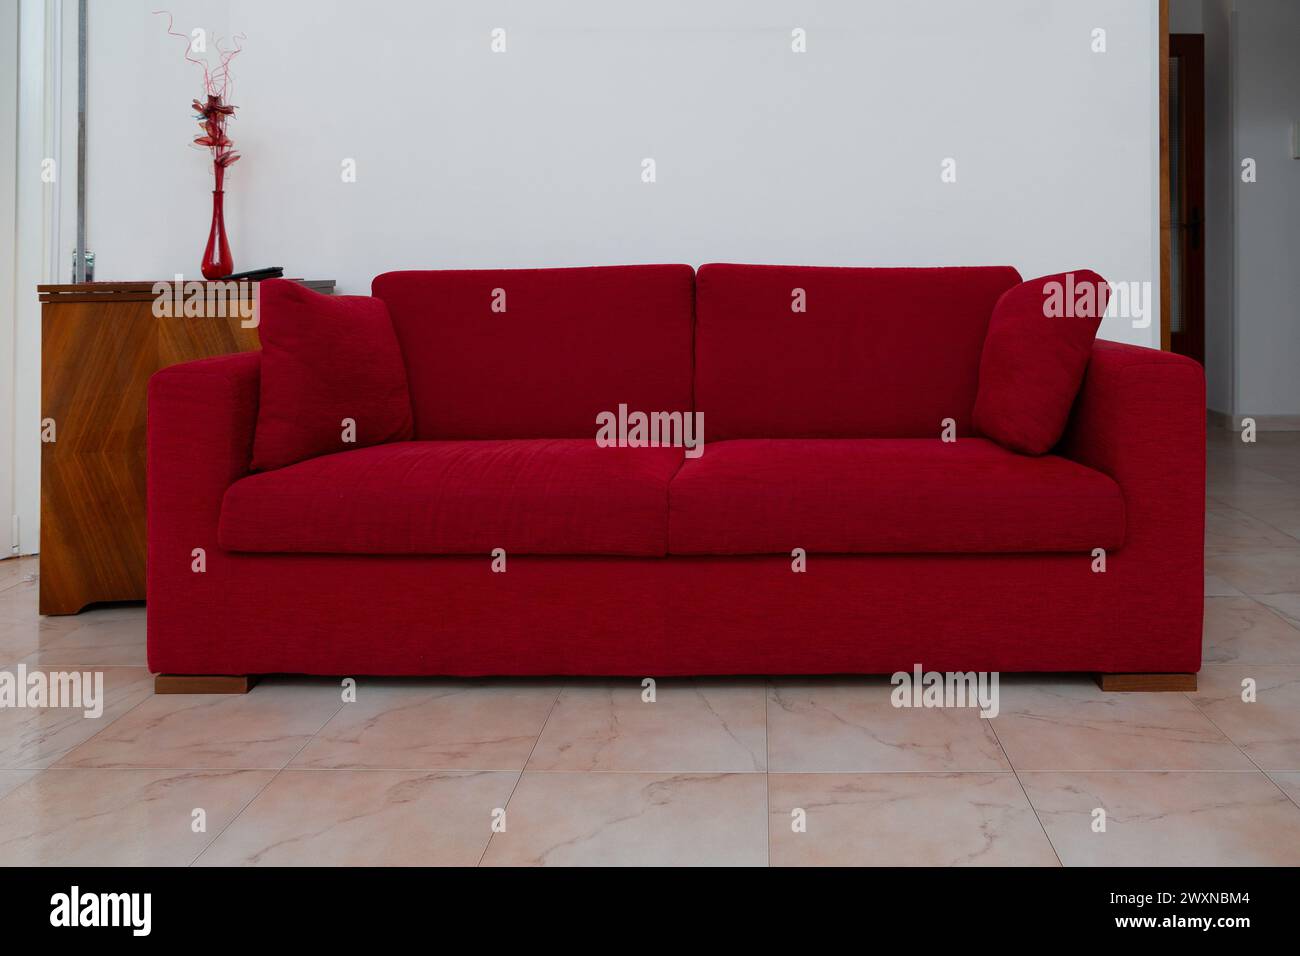 a stylish red sofa offers a pop of color against a minimalist decor, reflecting contemporary home styling Stock Photo